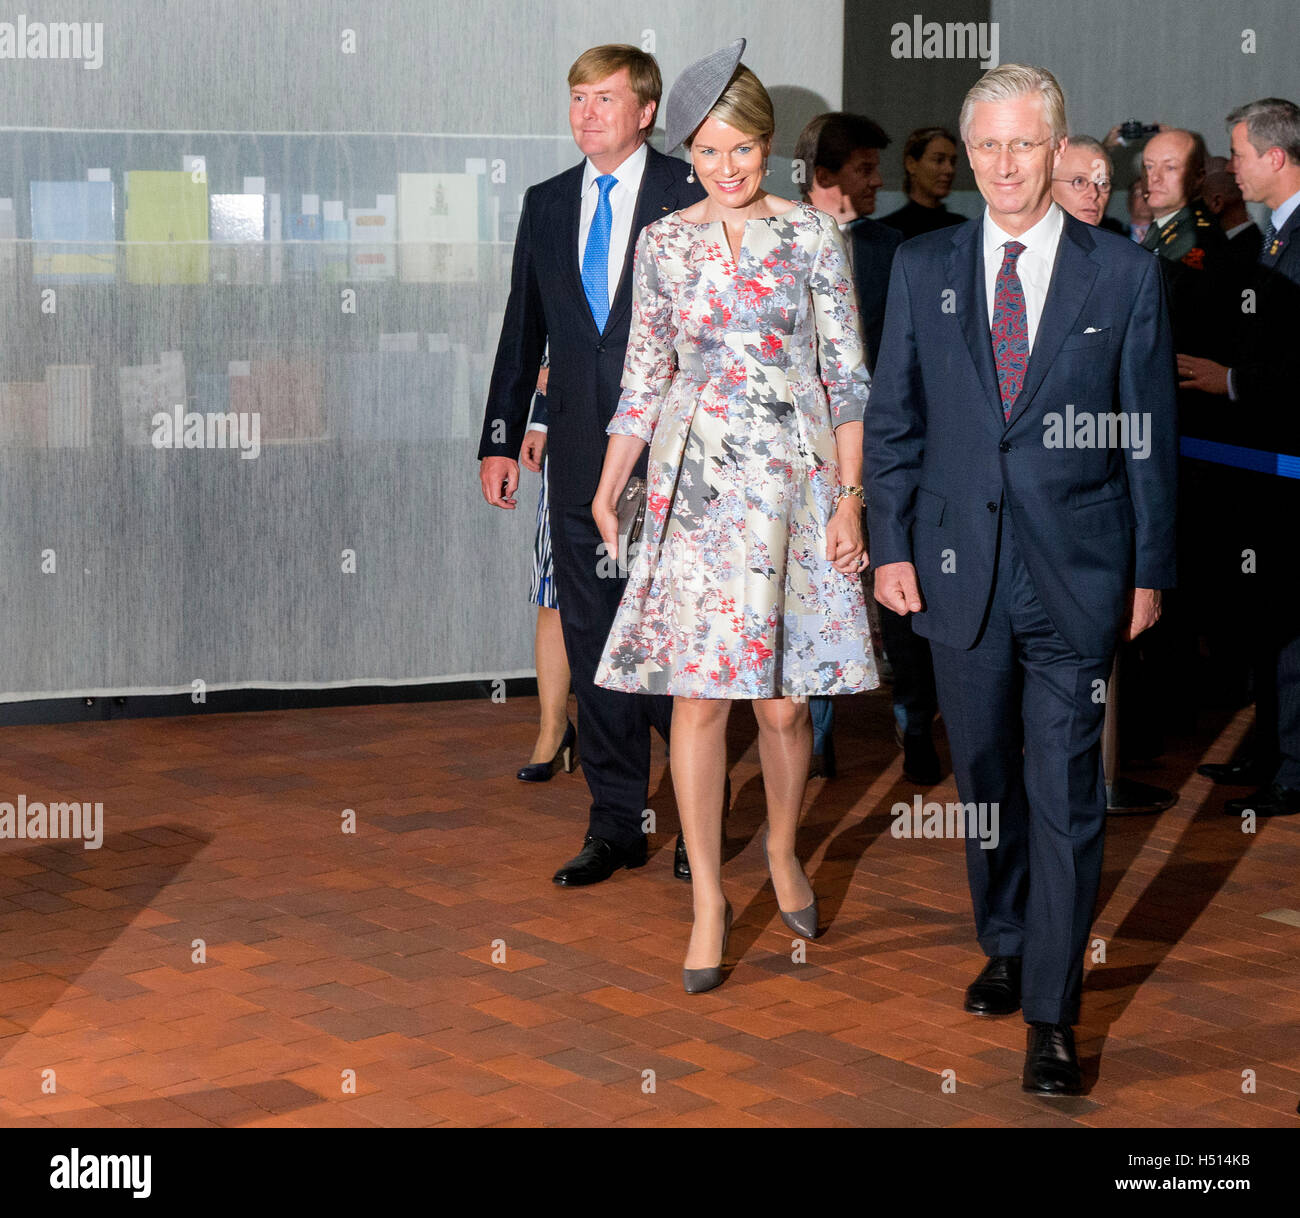 Frankfurt, Germany. 18th Oct, 2016. King Willem-Alexander of The Netherlands and King Philippe of Belgium open the Dutch Flemish pavilion of the Buchmesse in Frankfurt, Germany, 18 October 2016. Queen Mathilde also attends the opening. Photo: Patrick van Katwijk/ POINT DE VUE OUT - NO WIRE SERVICE -/dpa/Alamy Live News Stock Photo